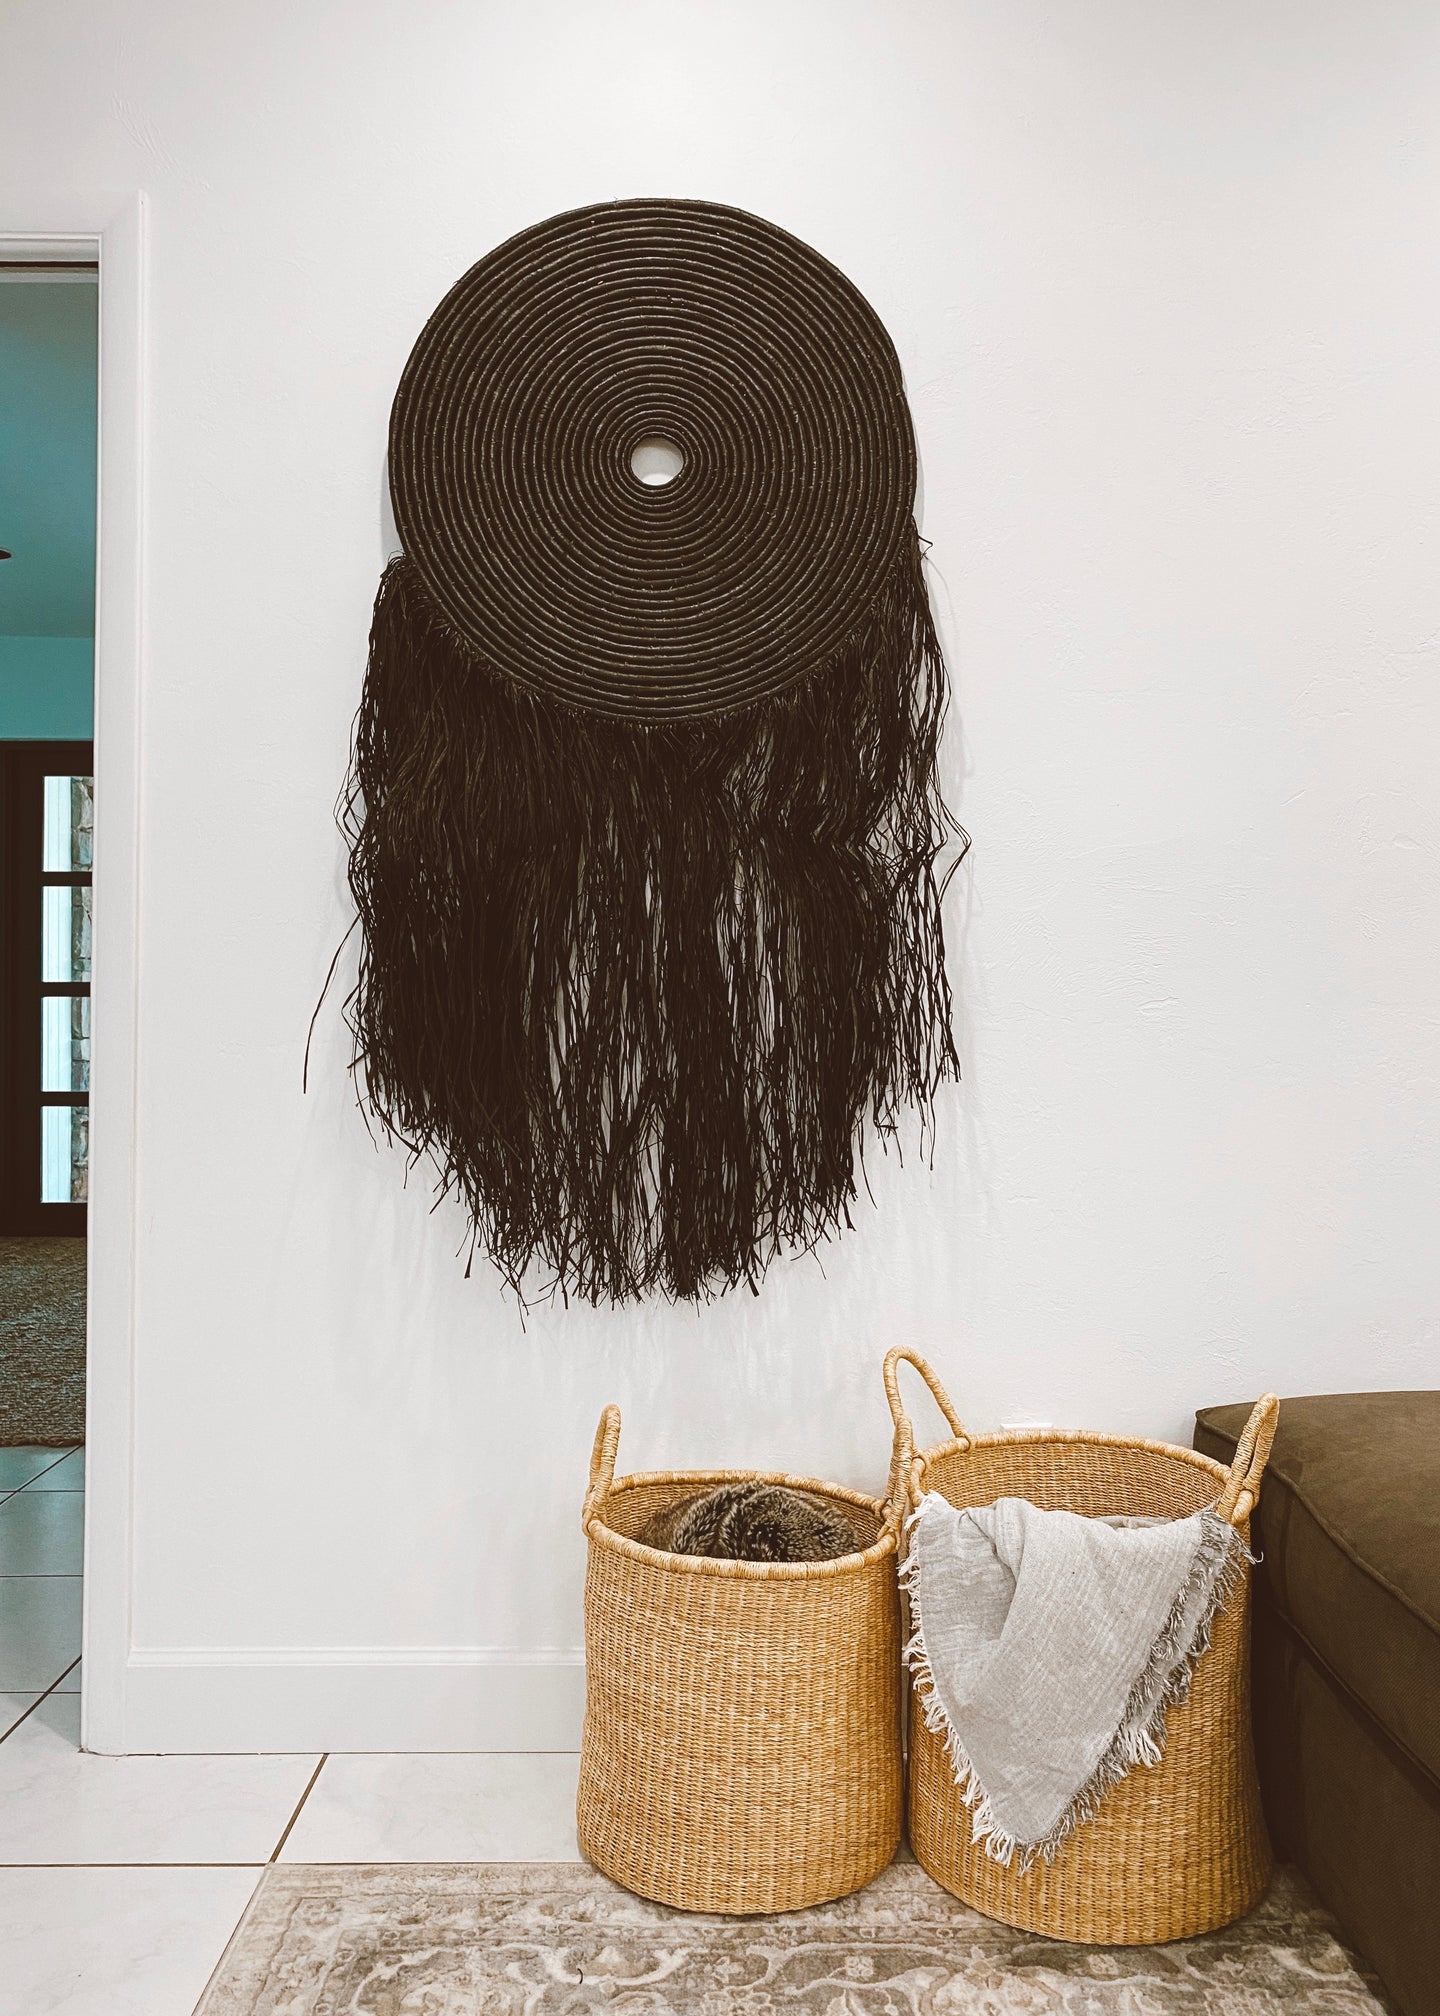 Fringed Wall Disk